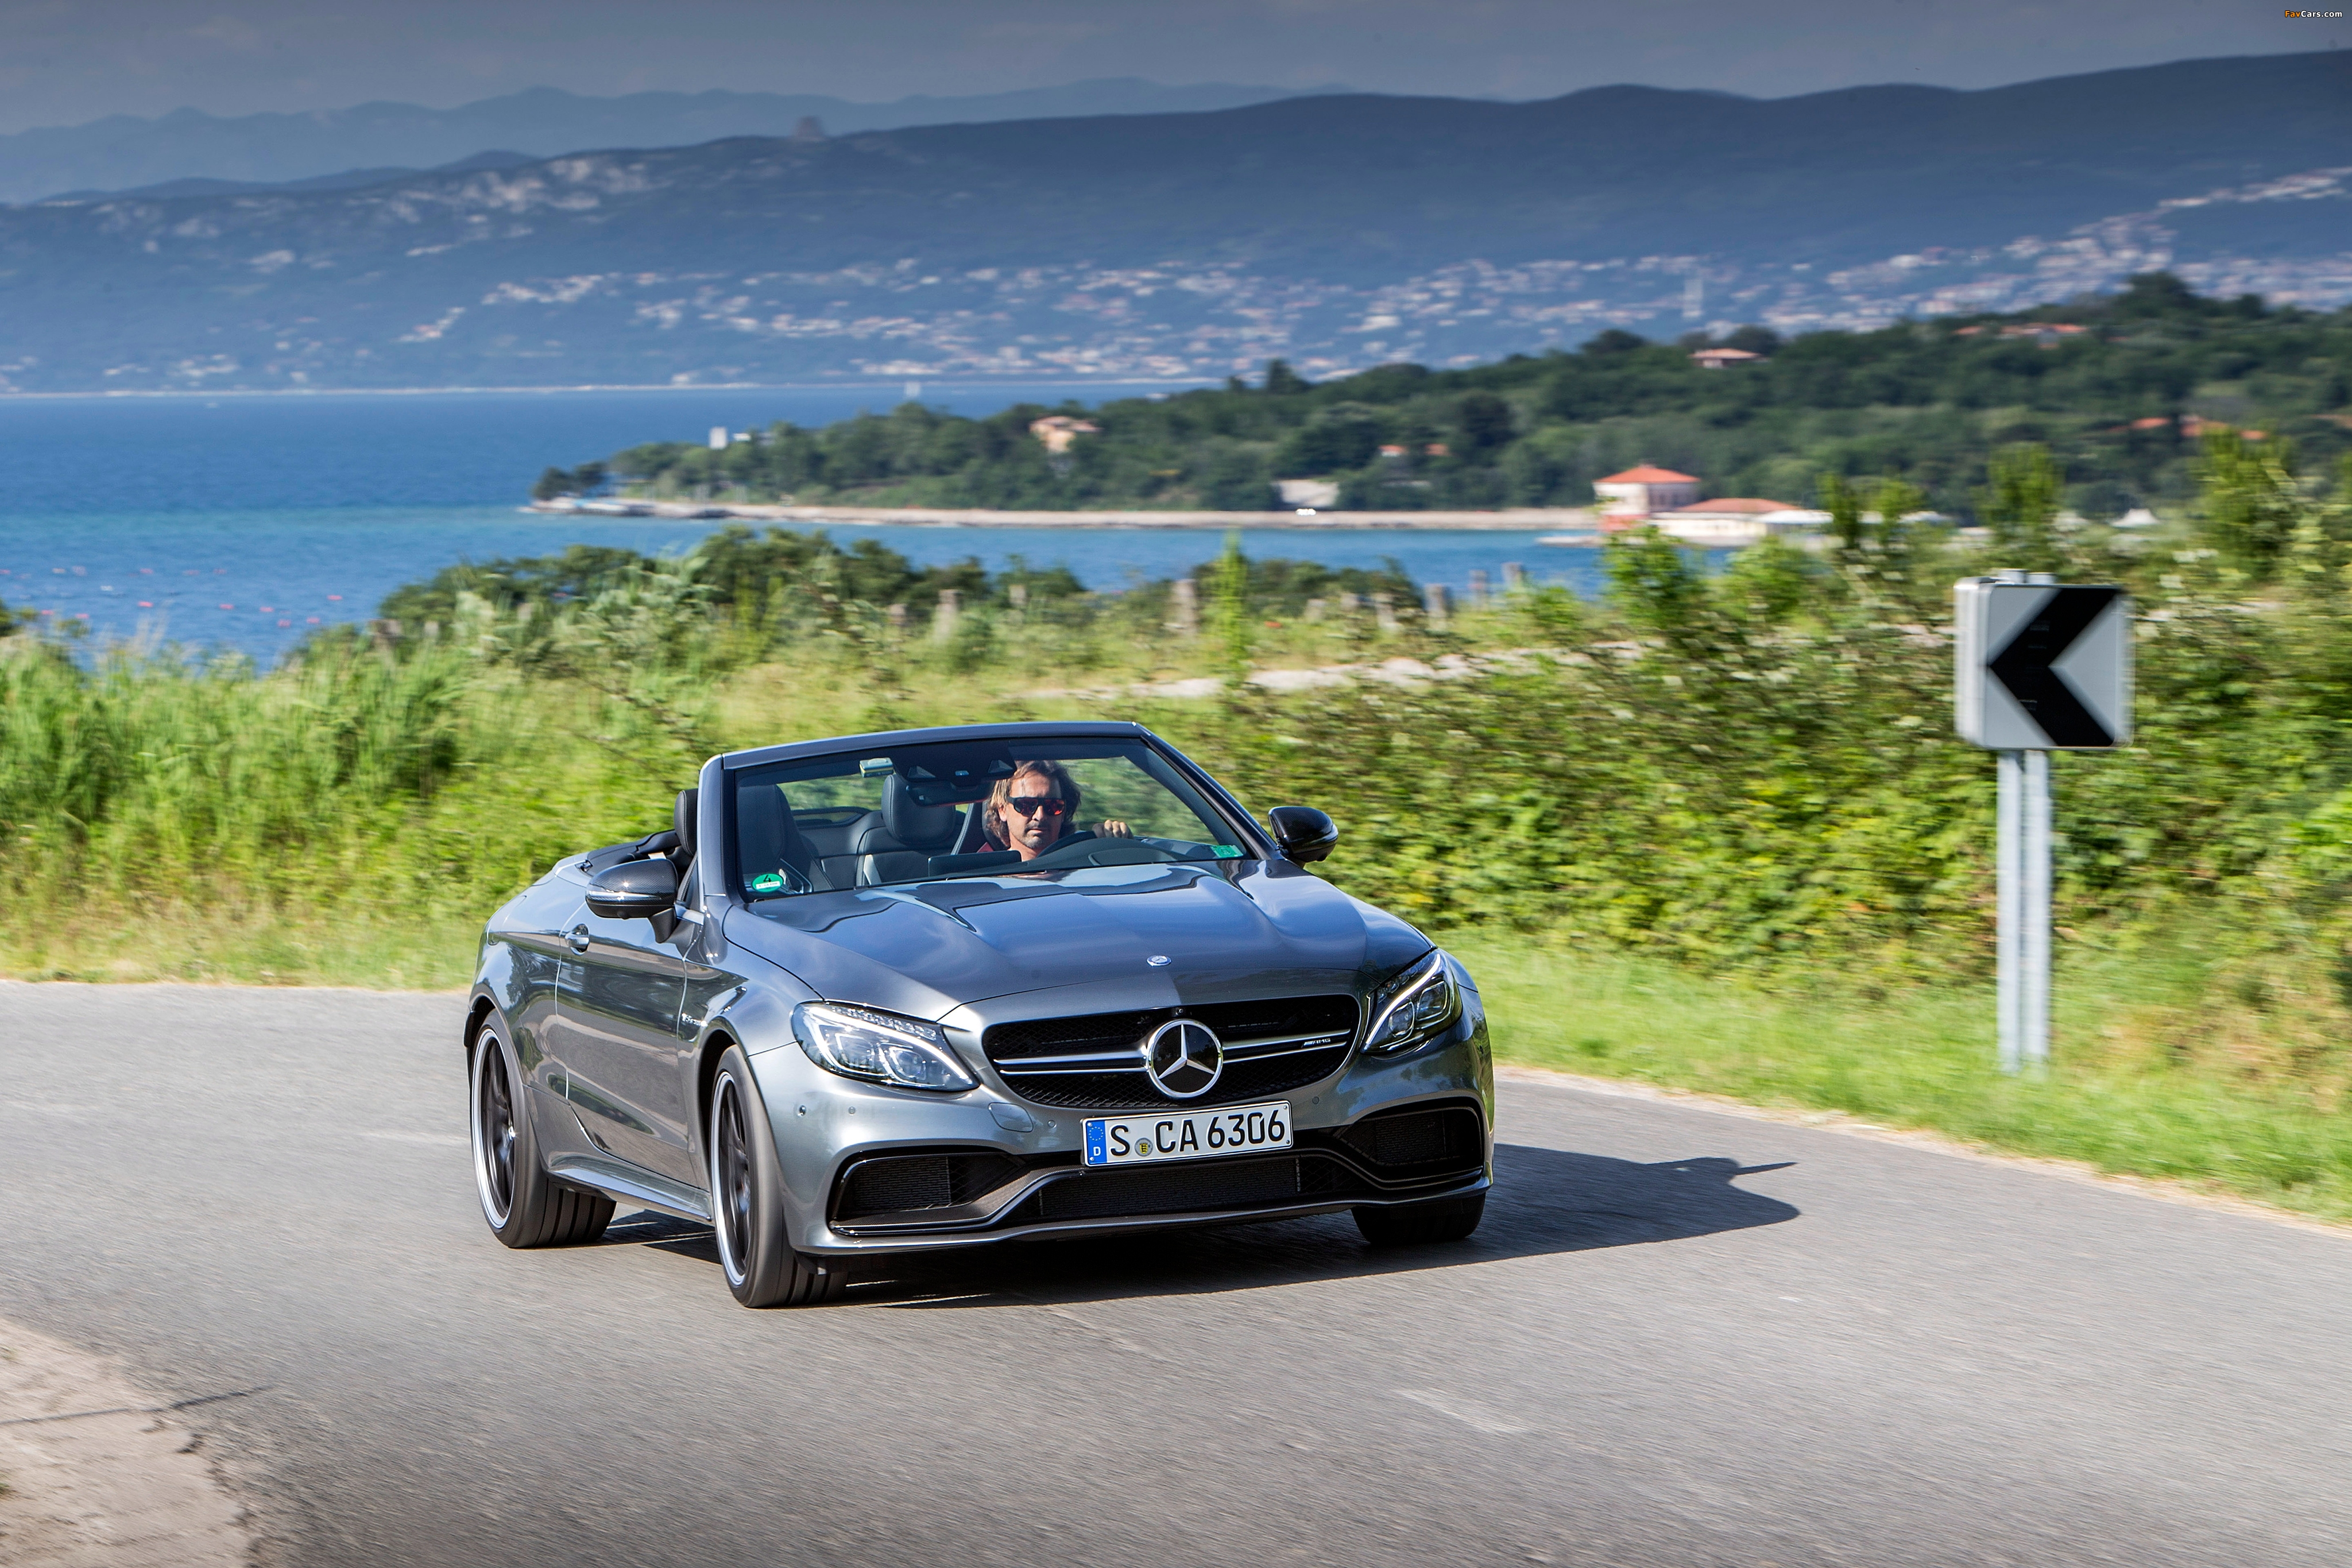 Mercedes-AMG C 63 S Cabriolet (A205) 2016 pictures (4096 x 2731)